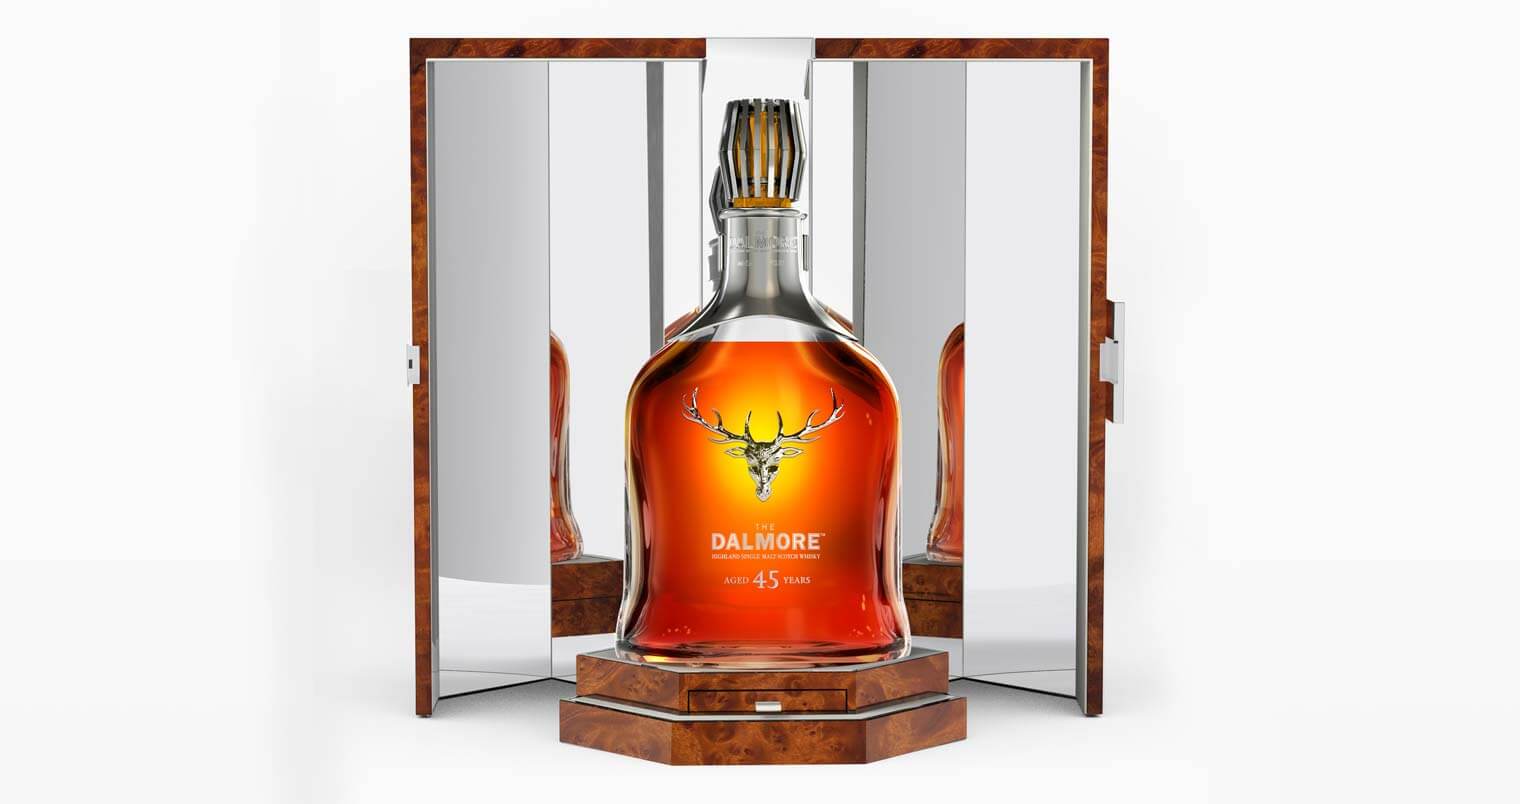 The Dalmore 45 Year Old, bottle and packaging on white back, featured image